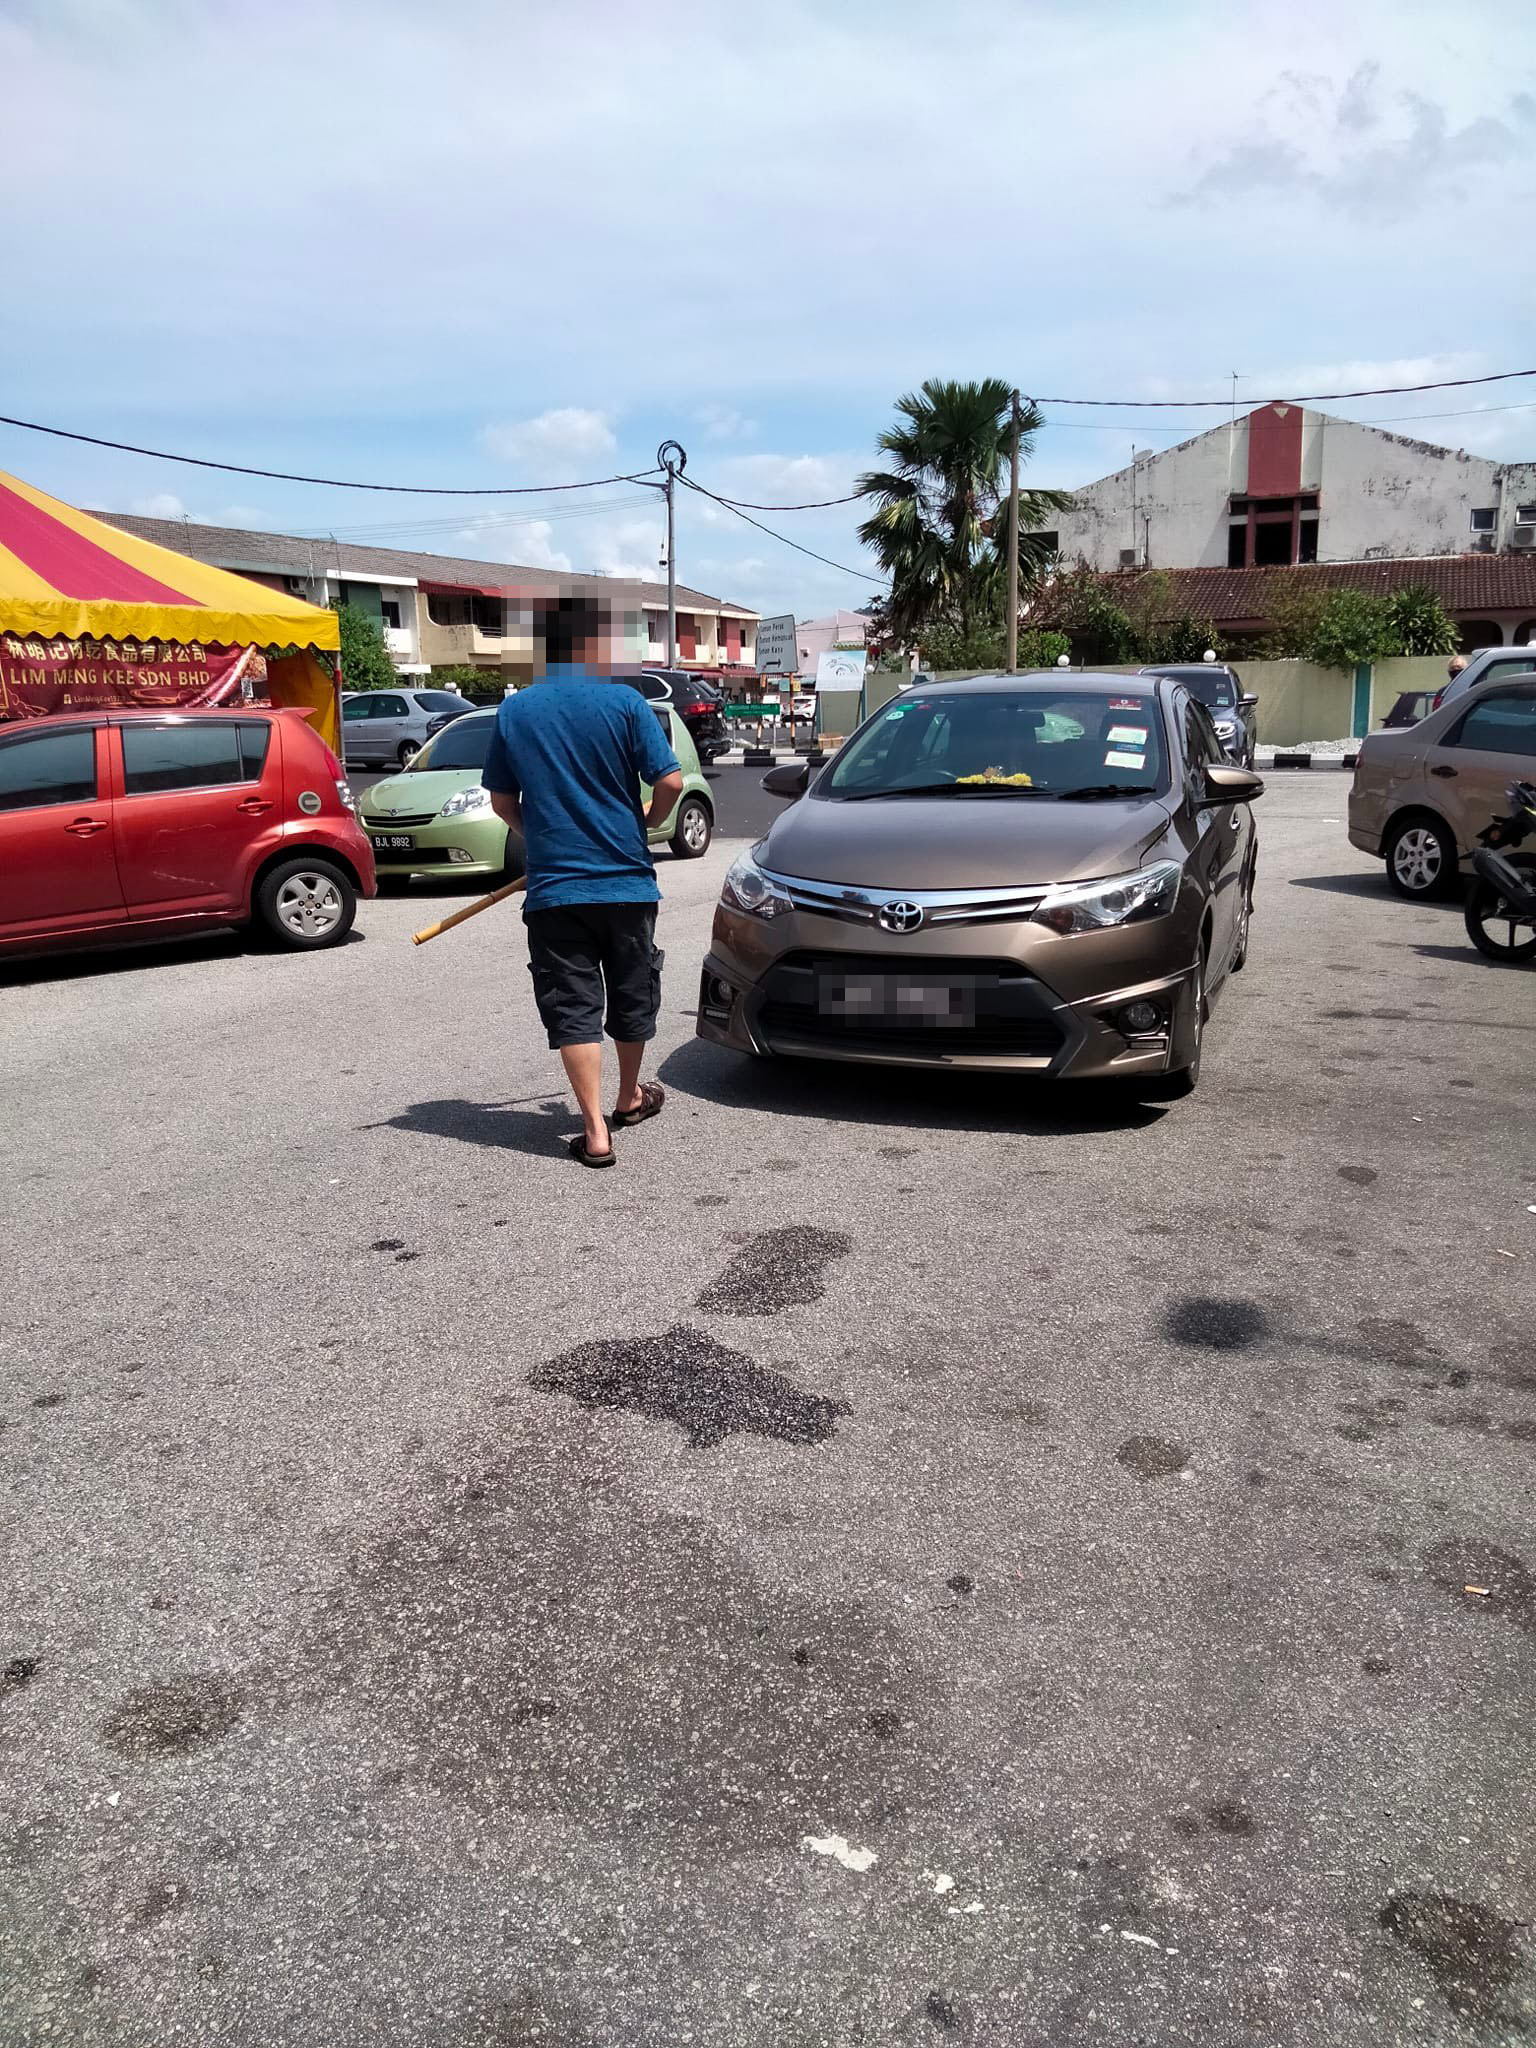 The man bringing a stick to a local kopitiam in Ipoh before using it to smash property.